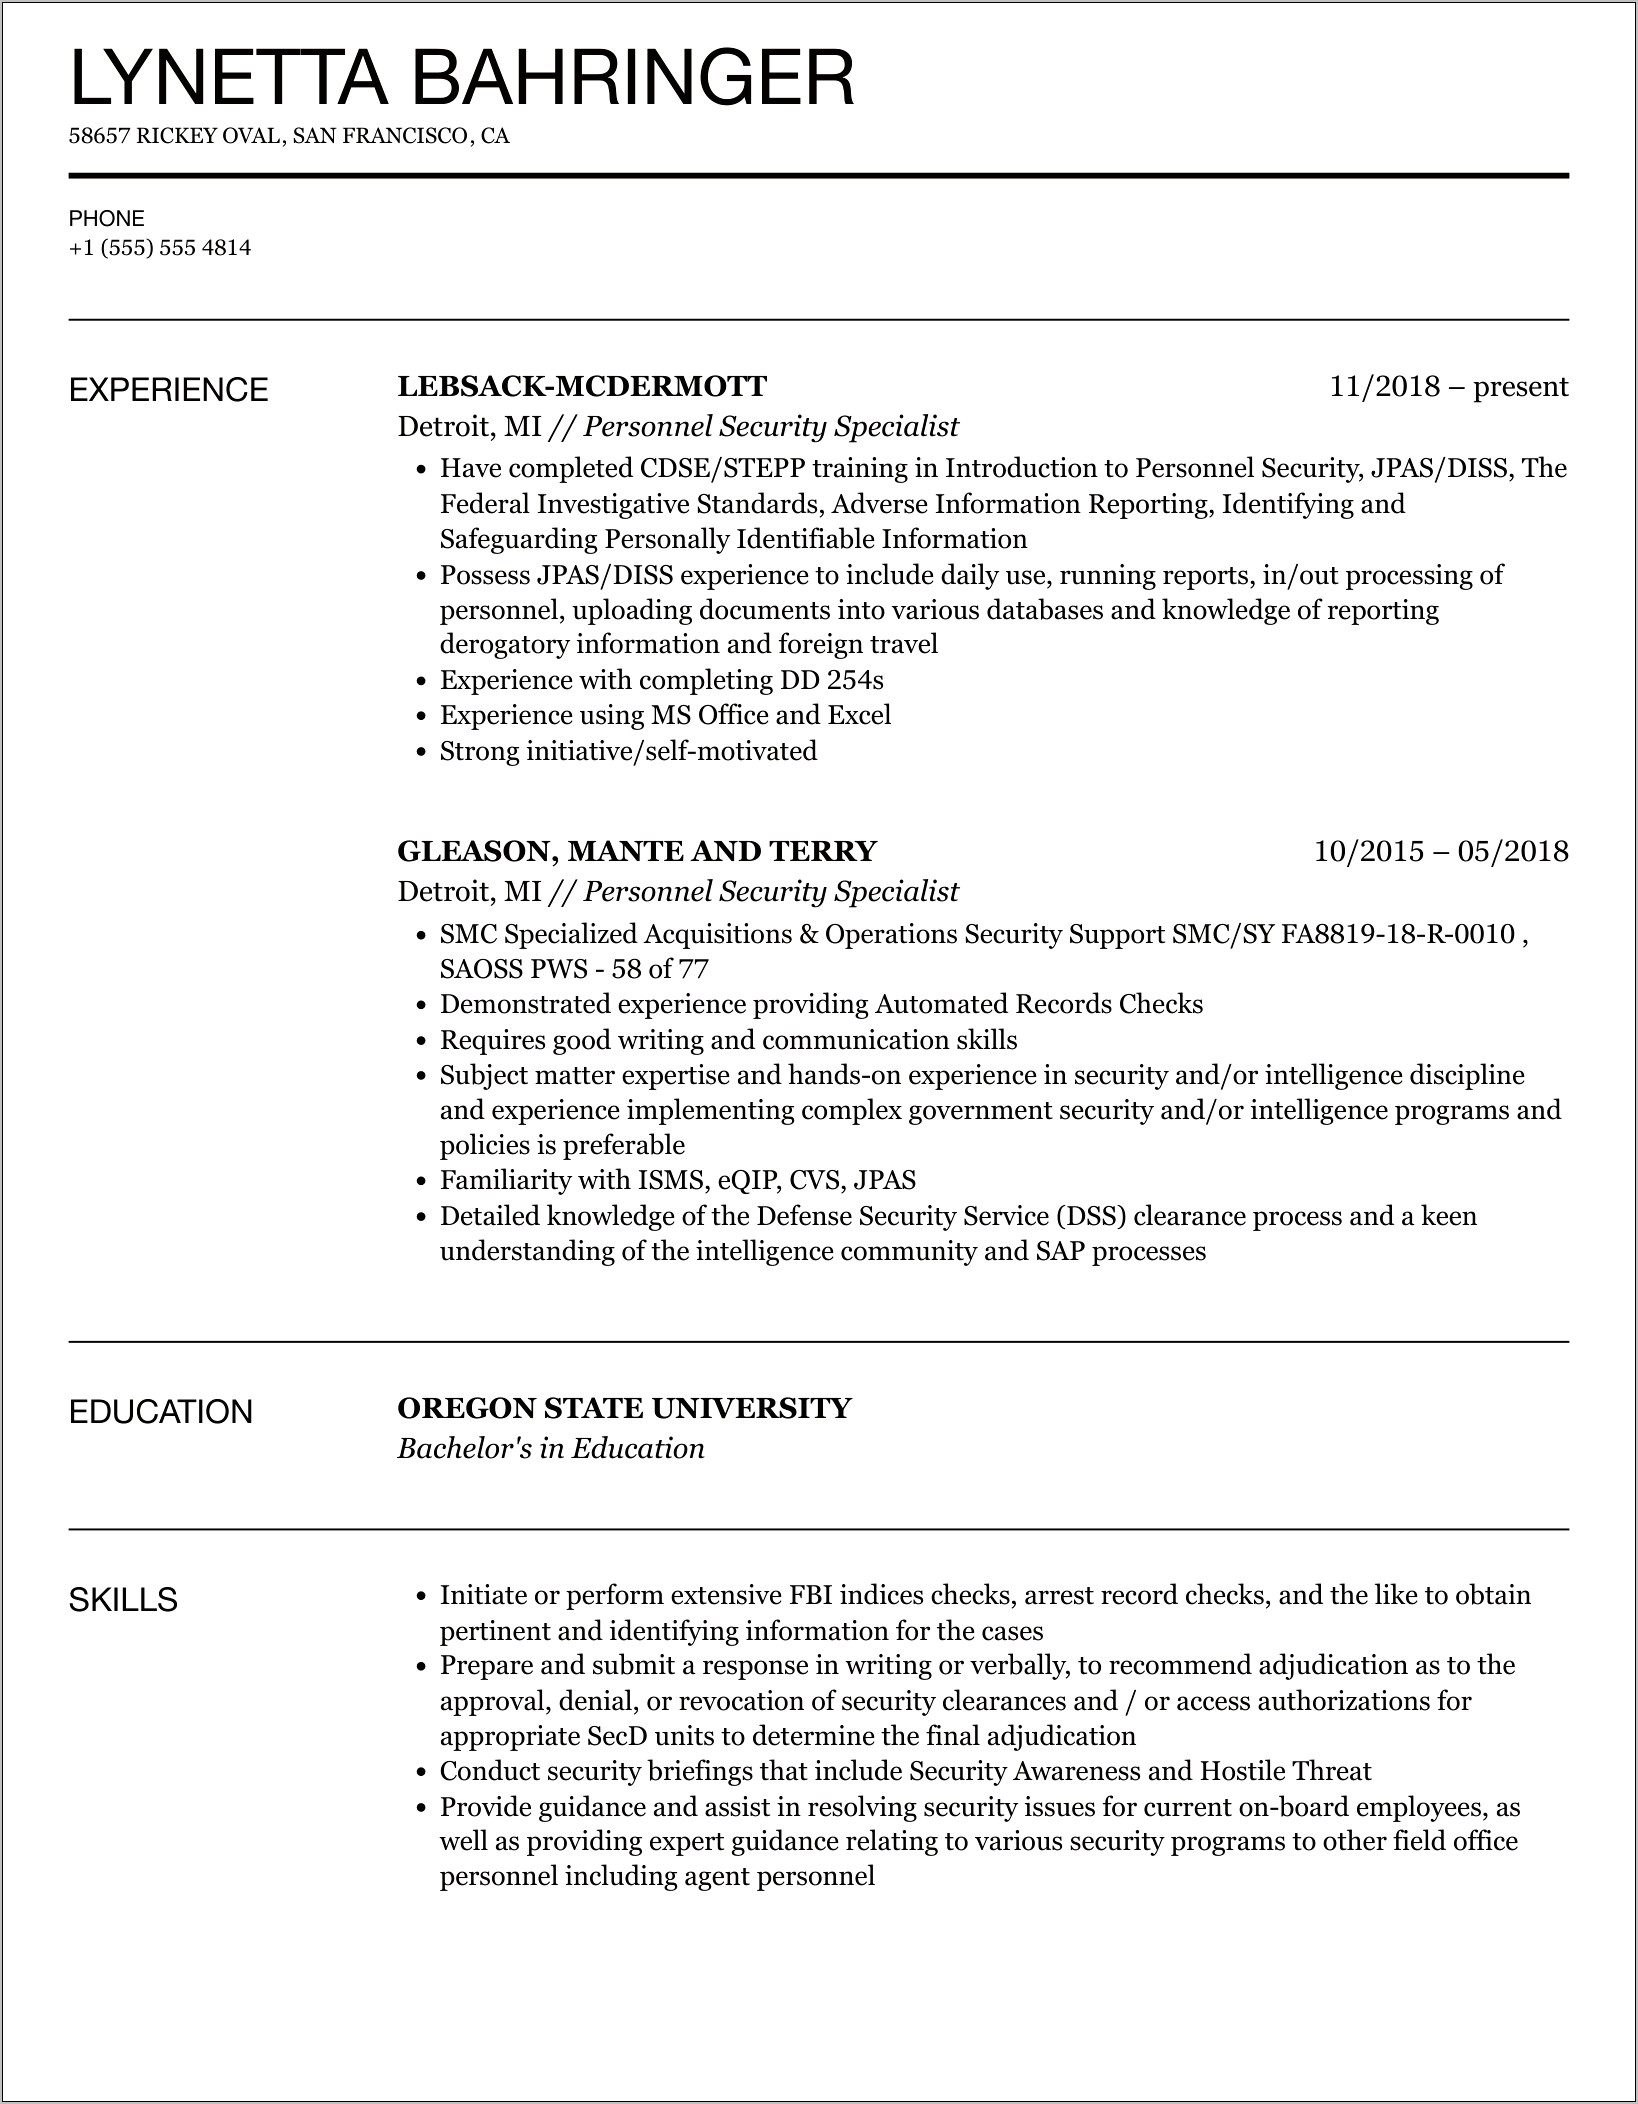 Resume Objective For Security Specialist